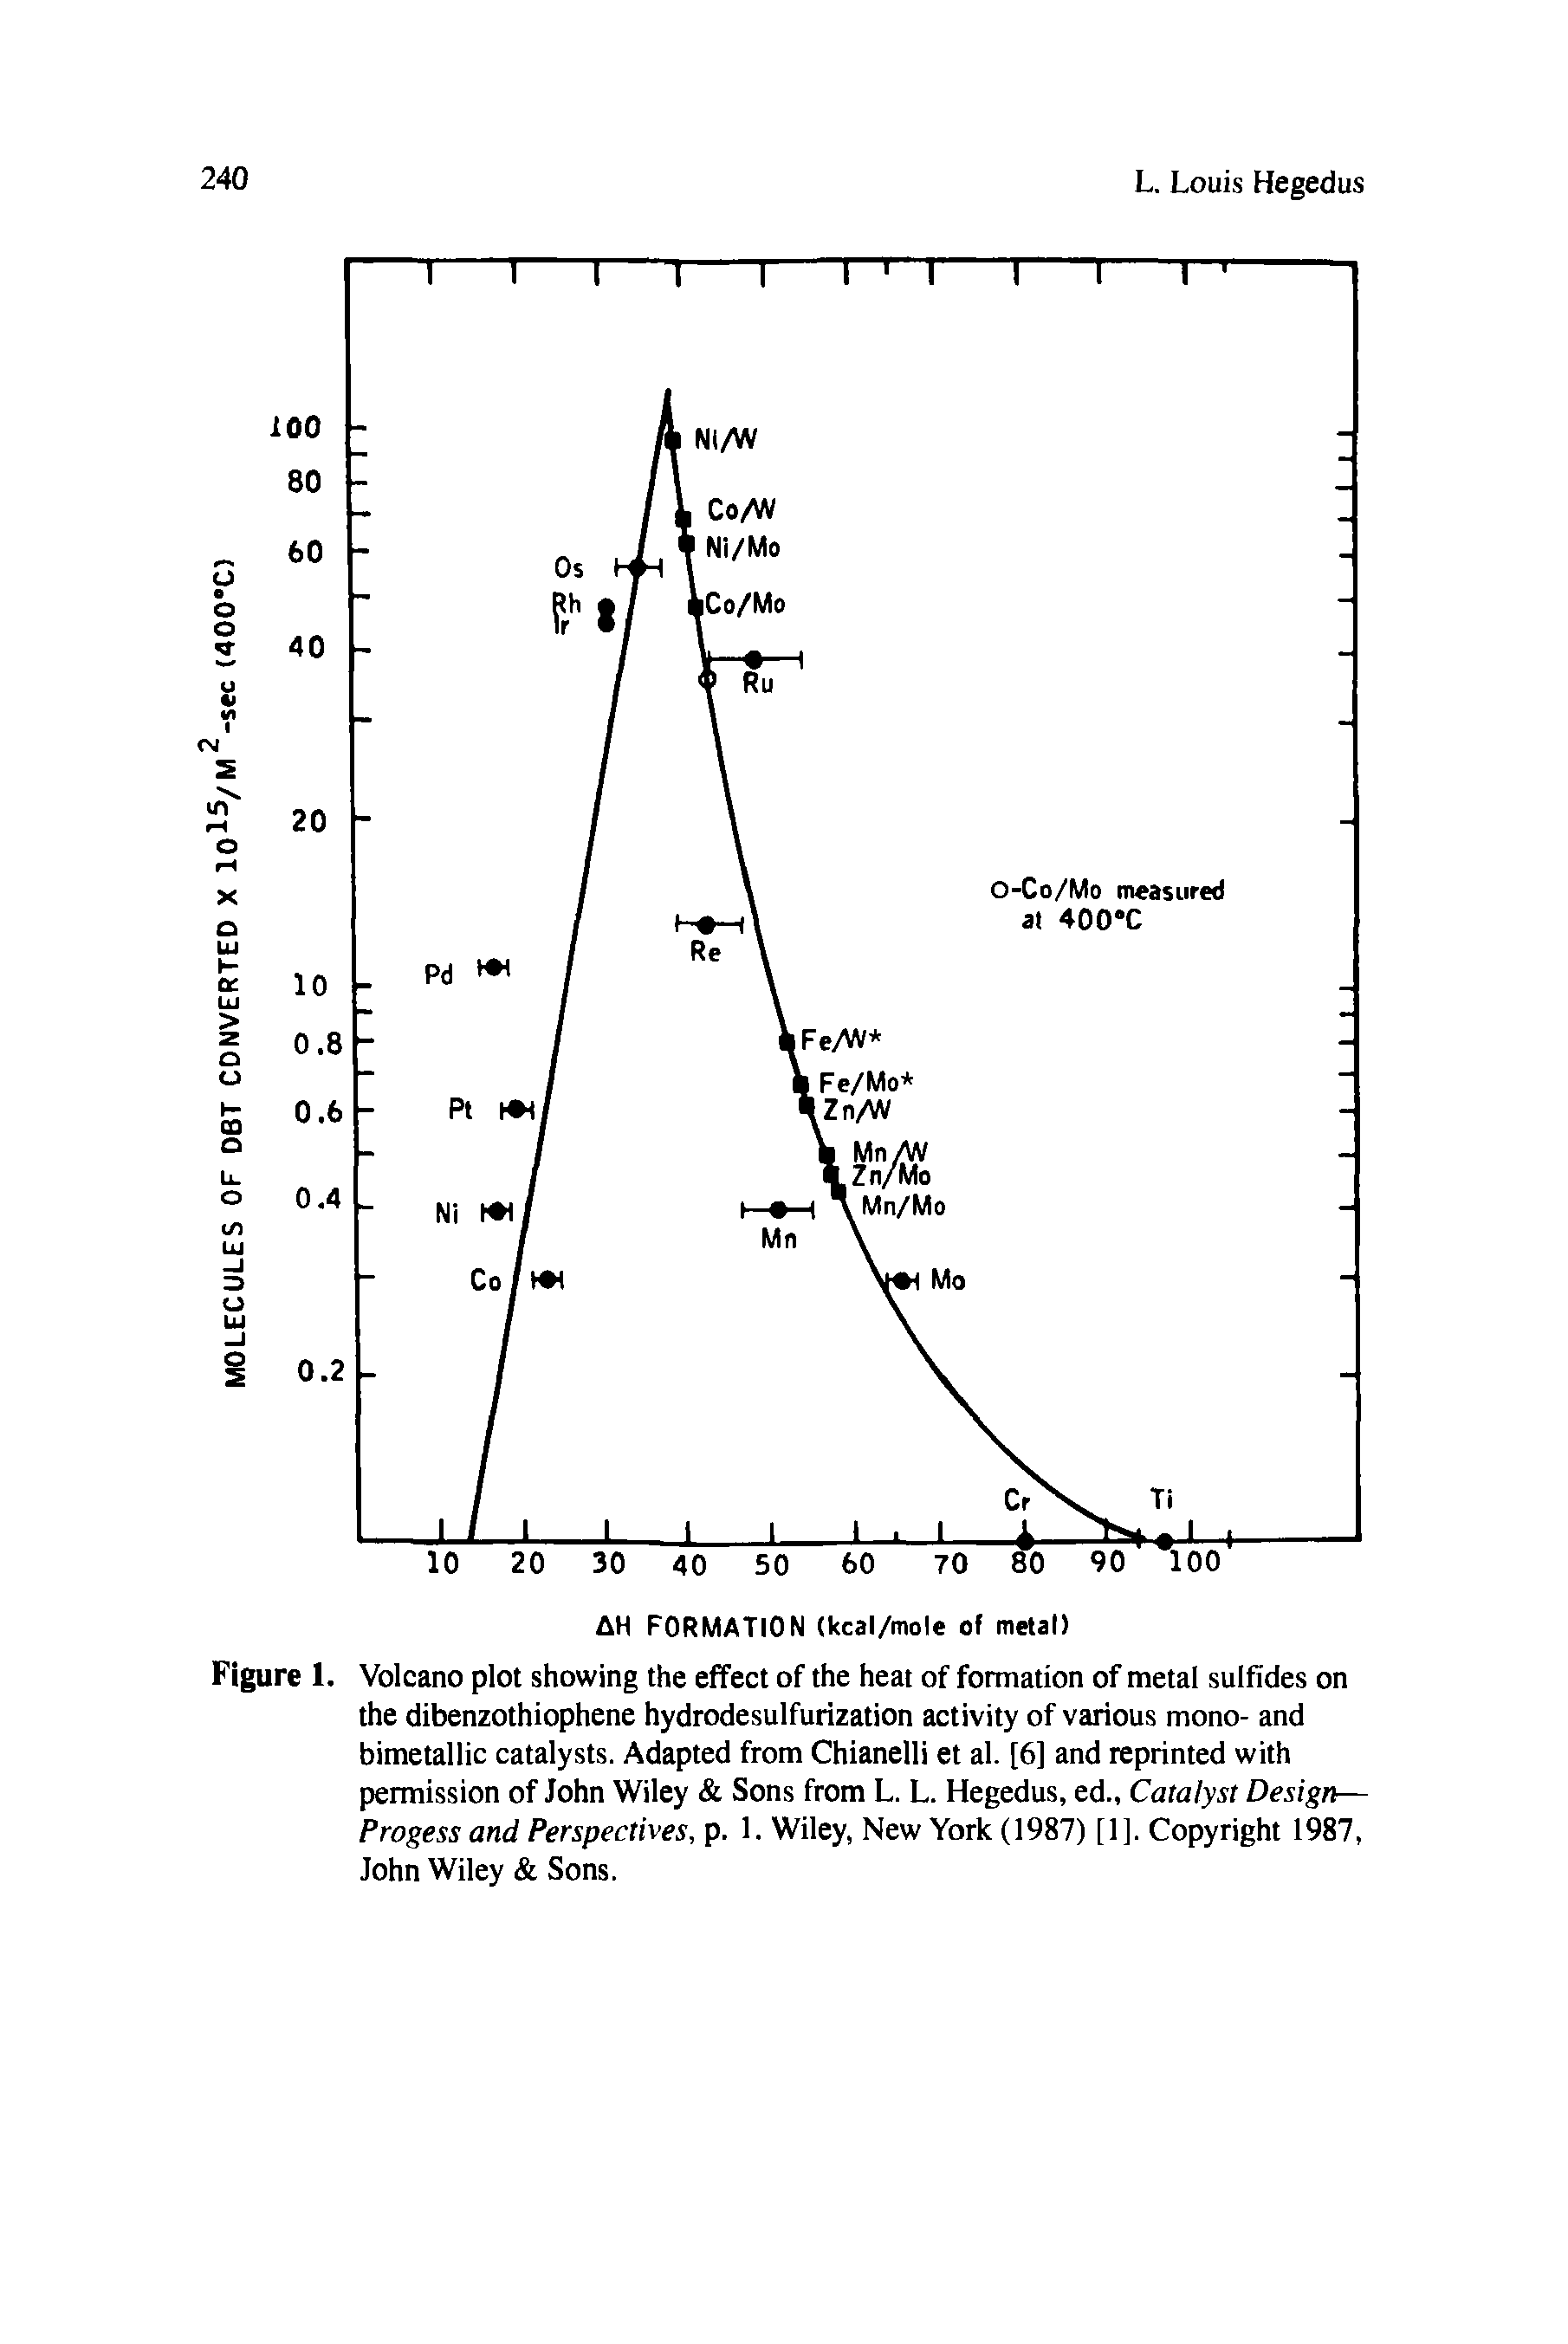 Figure 1. Volcano plot showing the effect of the heat of formation of metal sulfides on the dibenzothiophene hydrodesulfurization activity of various mono- and bimetallic catalysts. Adapted from Chianelli et al. [6] and reprinted with permission of John Wiley Sons from L. L. Hegedus, ed., Catalyst Design— Progess and Perspectives, p. 1. Wiley, New York (1987) [1]. Copyright 1987, John Wiley Sons.